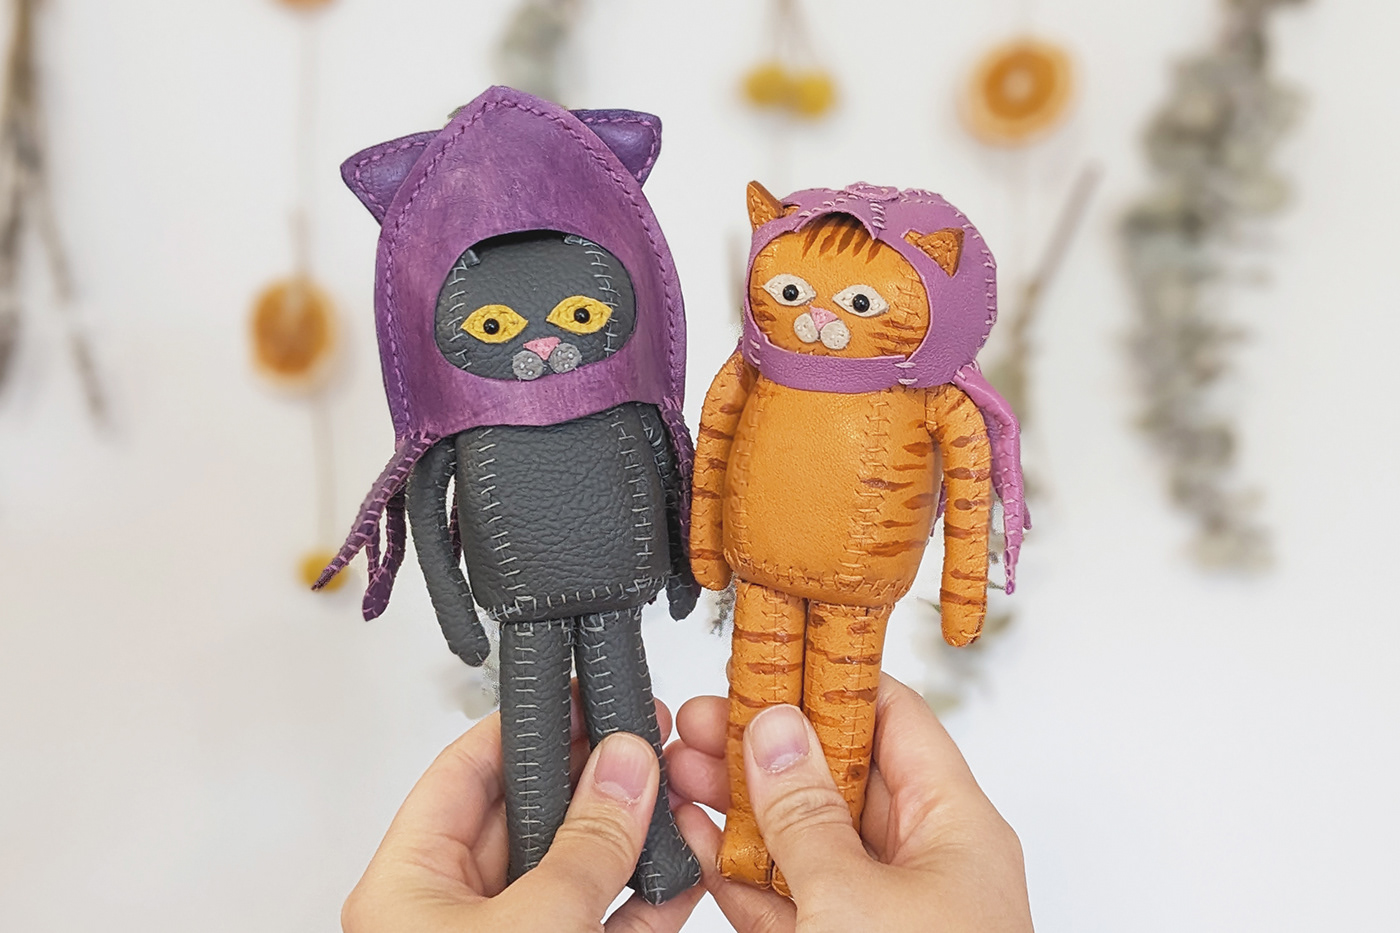 craft handmade Leather Craft leather hand dyed quirky doll Cat cat doll figure